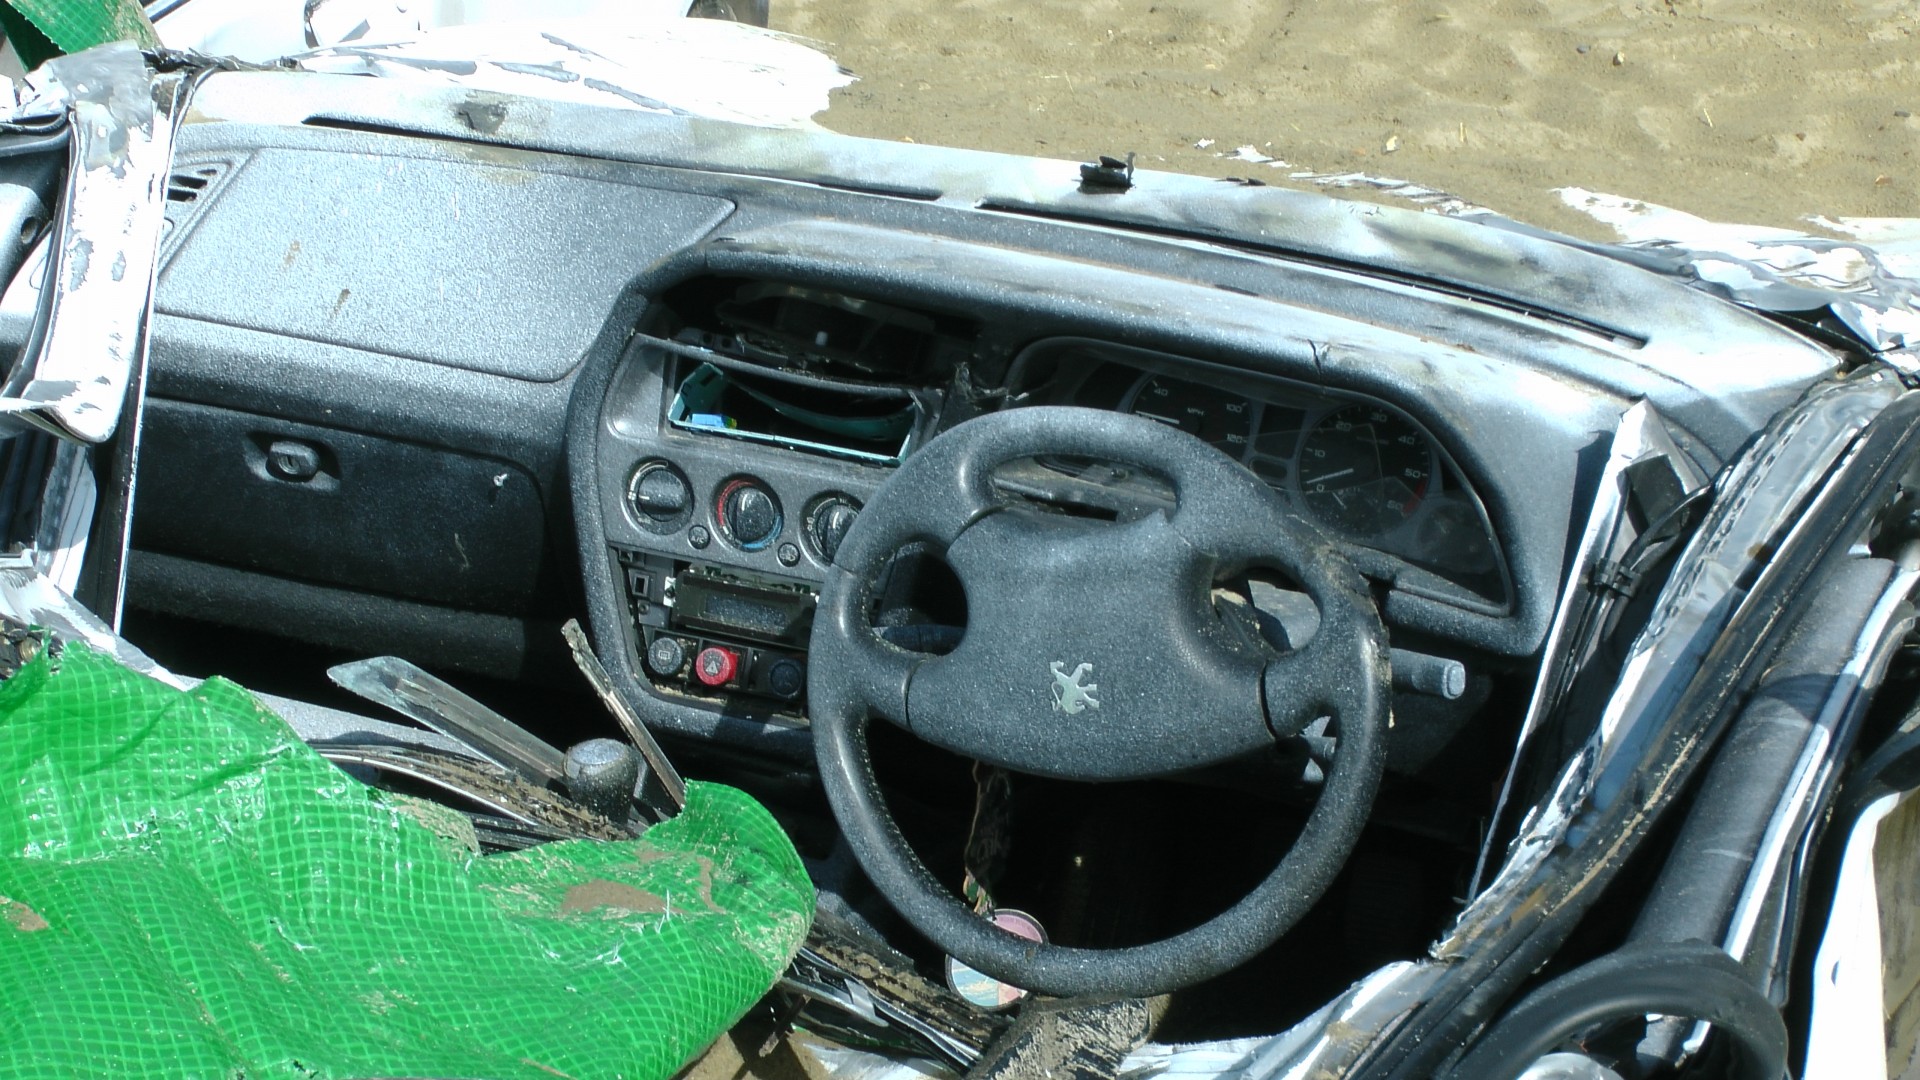 Wrecked Smashed Car Dashboard